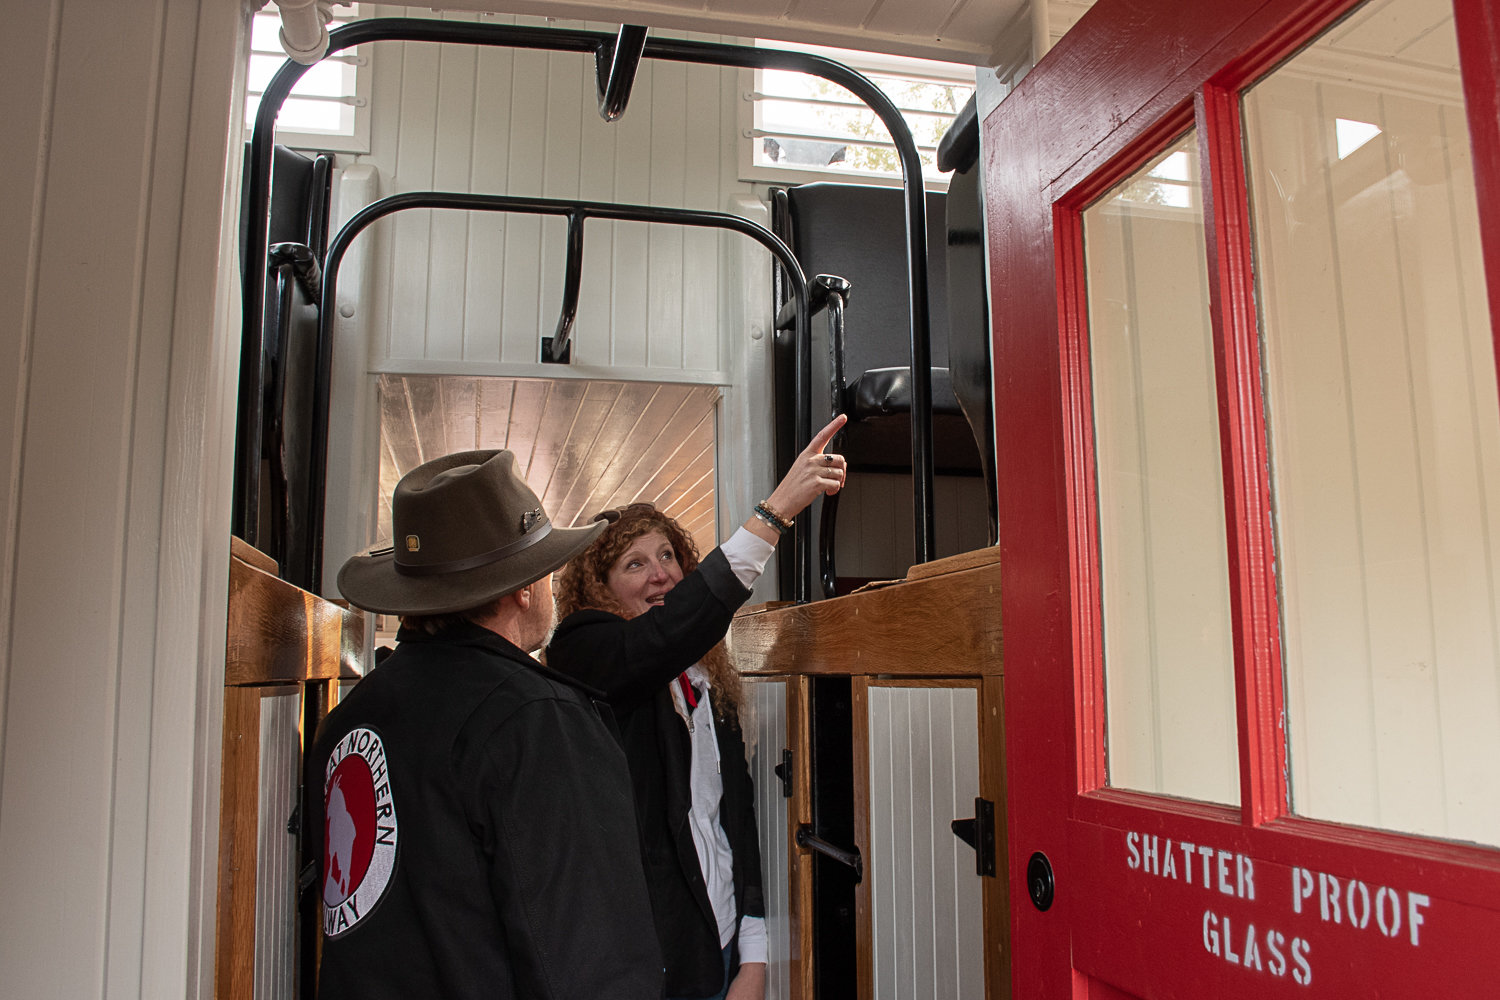 Fae Widenhoeft, of the band SeaStar, points out where she used to keep her outfits in the cupola to Don Bowman, one of the two men who restored the nearly 100-year-old caboose.